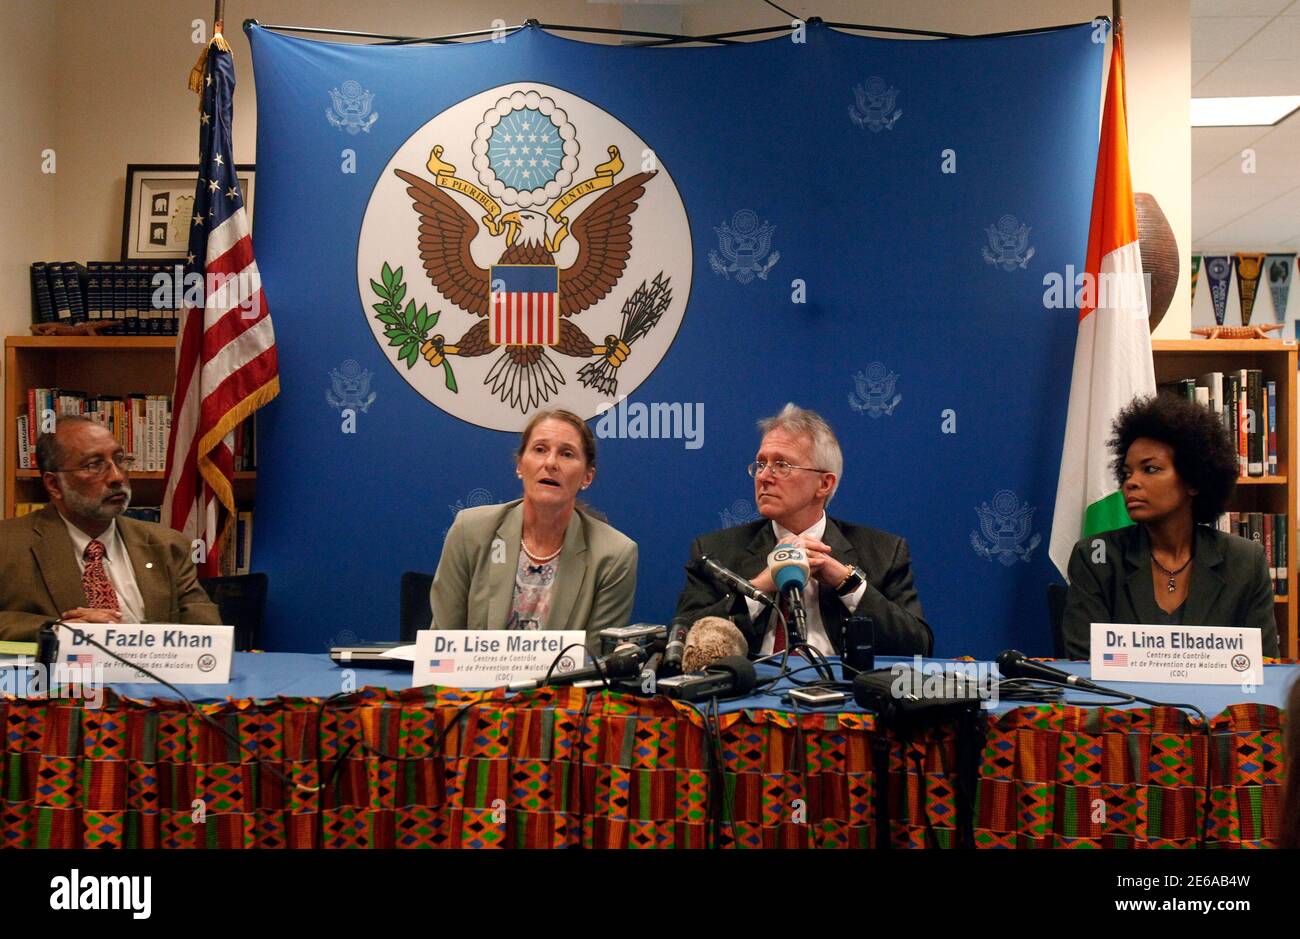 Dr. Lise Martel (2nd L), a member of a U.S. experts delegation, speaks as she sits next to Terence Patrick McCulley, the U.S. ambassador to Ivory Coast, during a news conference aimed at helping to prevent the spread of the Ebola virus at the U.S. embassy in Abidjan September 18, 2014. Dr. Fazle Khan (L) and Dr. Lina Elbadawi (R), both of the U.S. Centers for the Control and Prevention of Diseases (CDC), sit on either side.     REUTERS/Luc Gnago   (IVORY COAST - Tags: HEALTH DISASTER POLITICS) Stock Photo